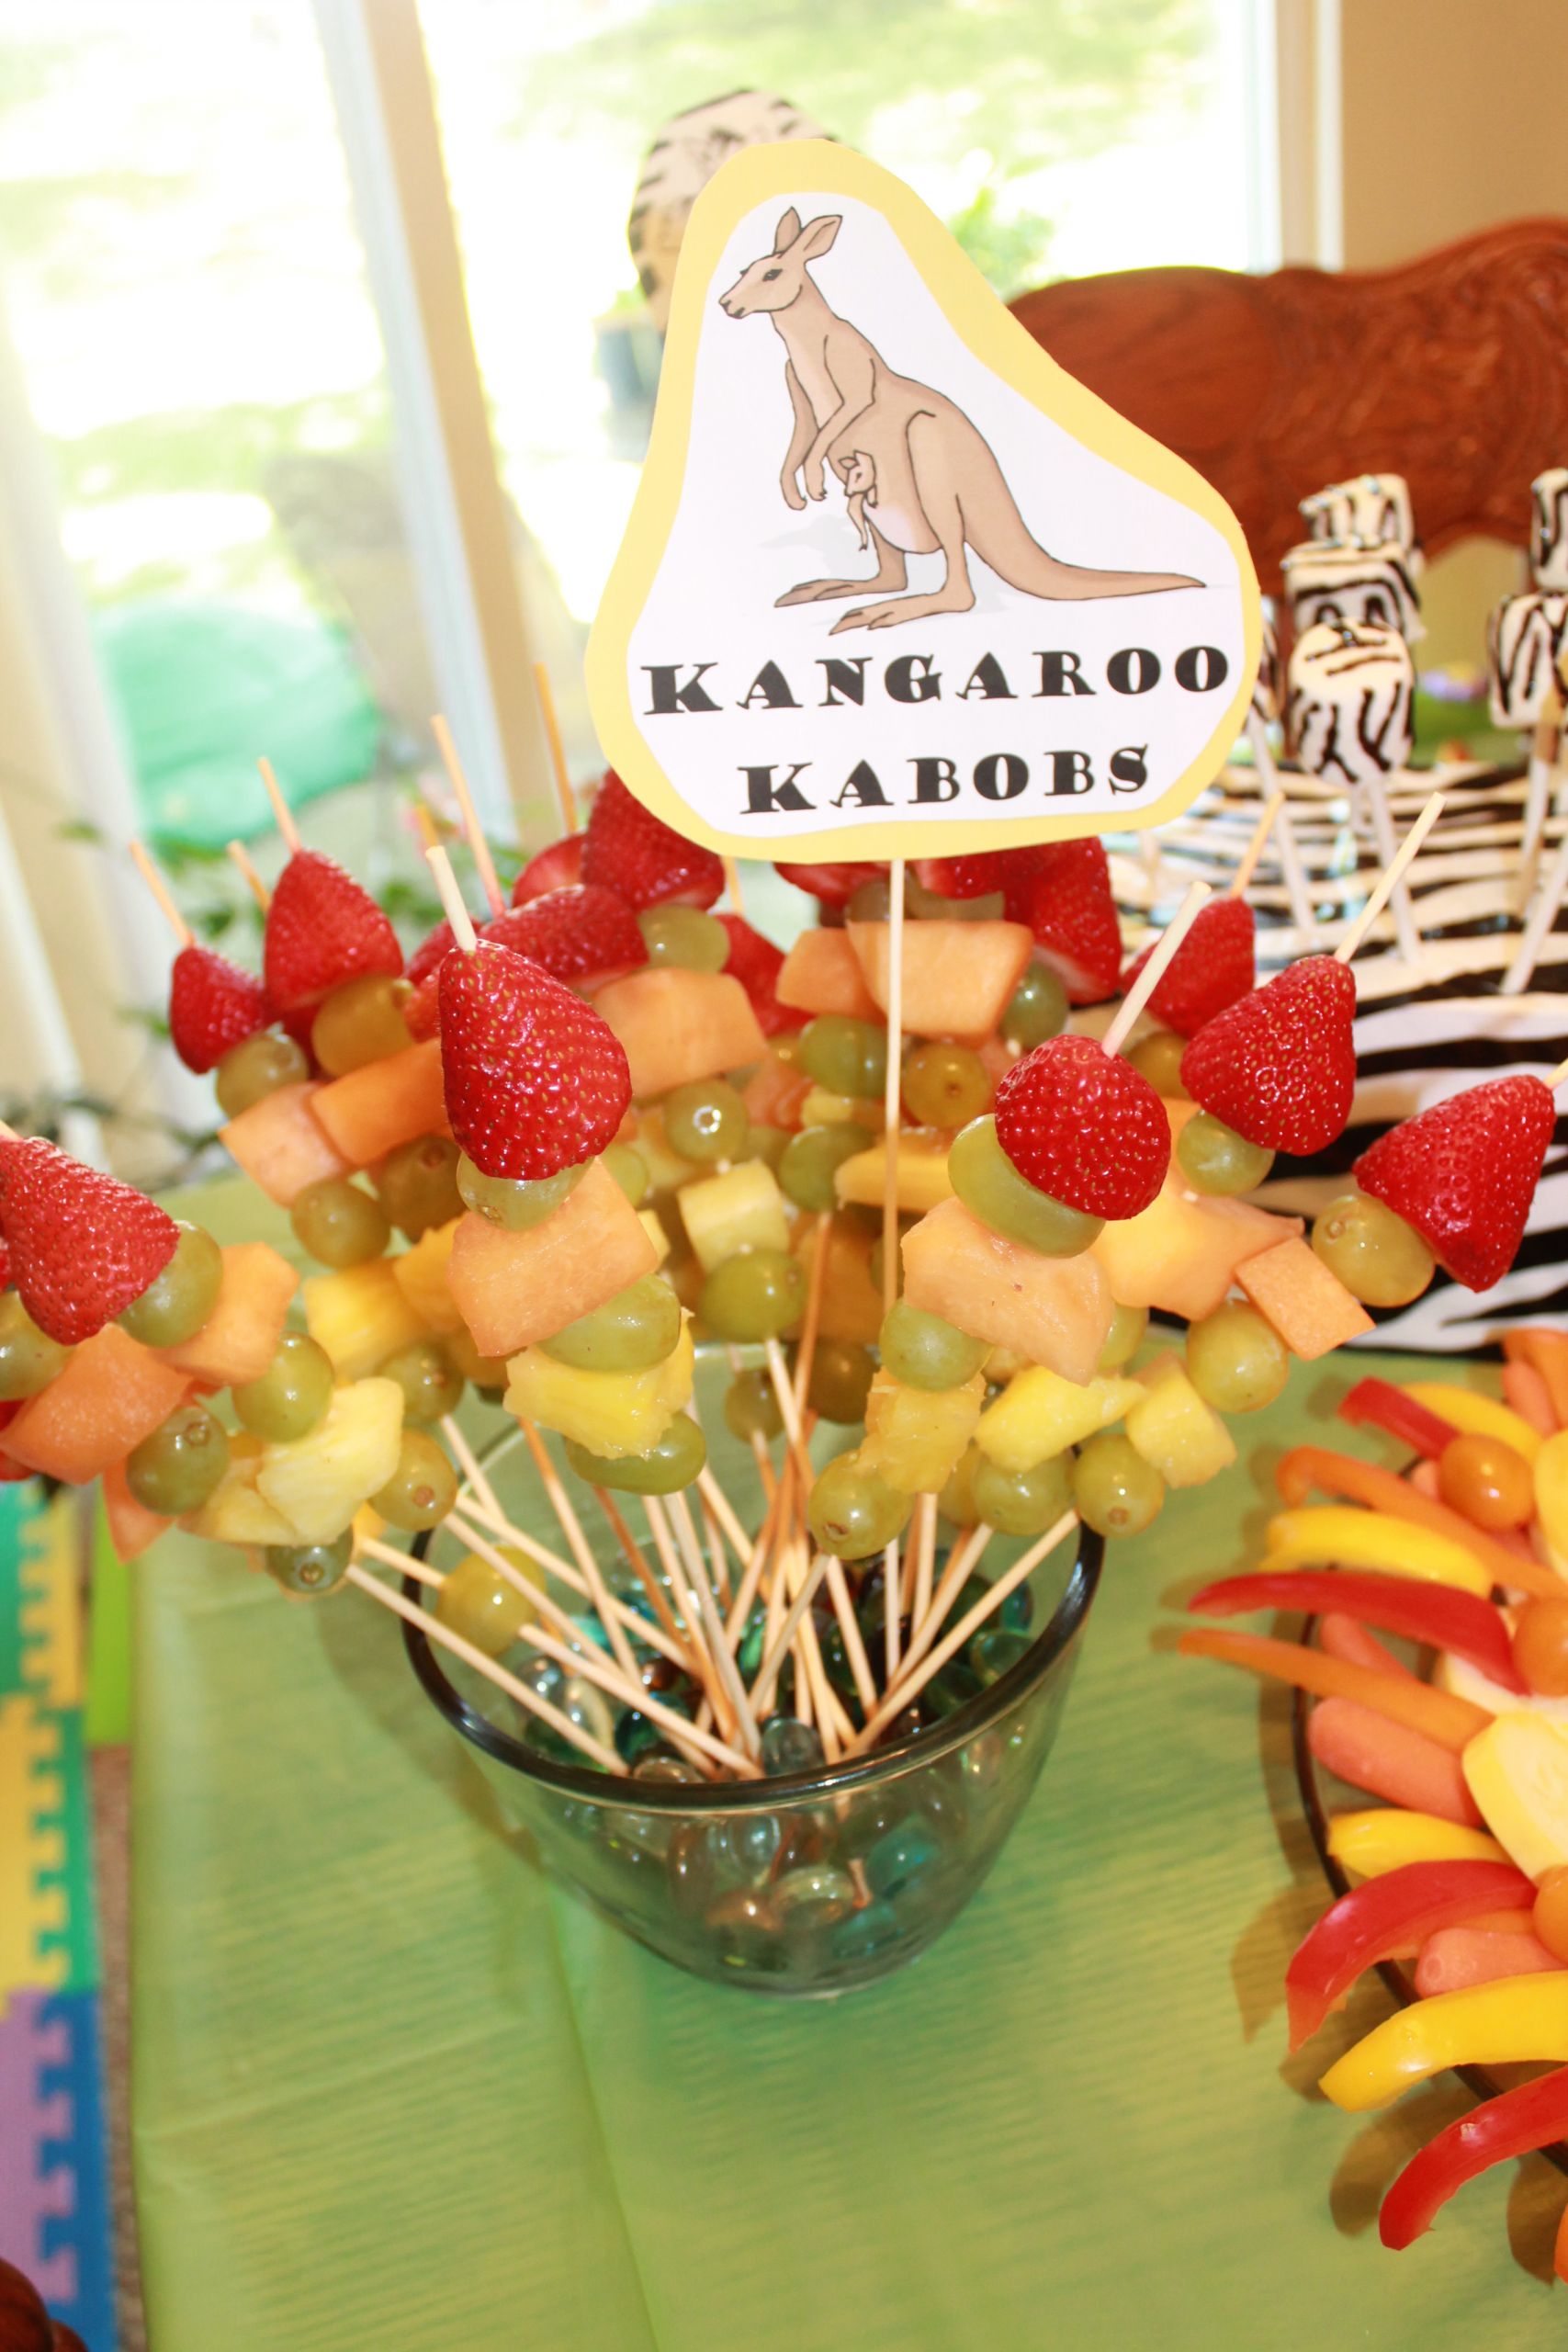 Birthday Party Food Ideas
 Kangaro kabobs and other fabulous food ideas for a zoo